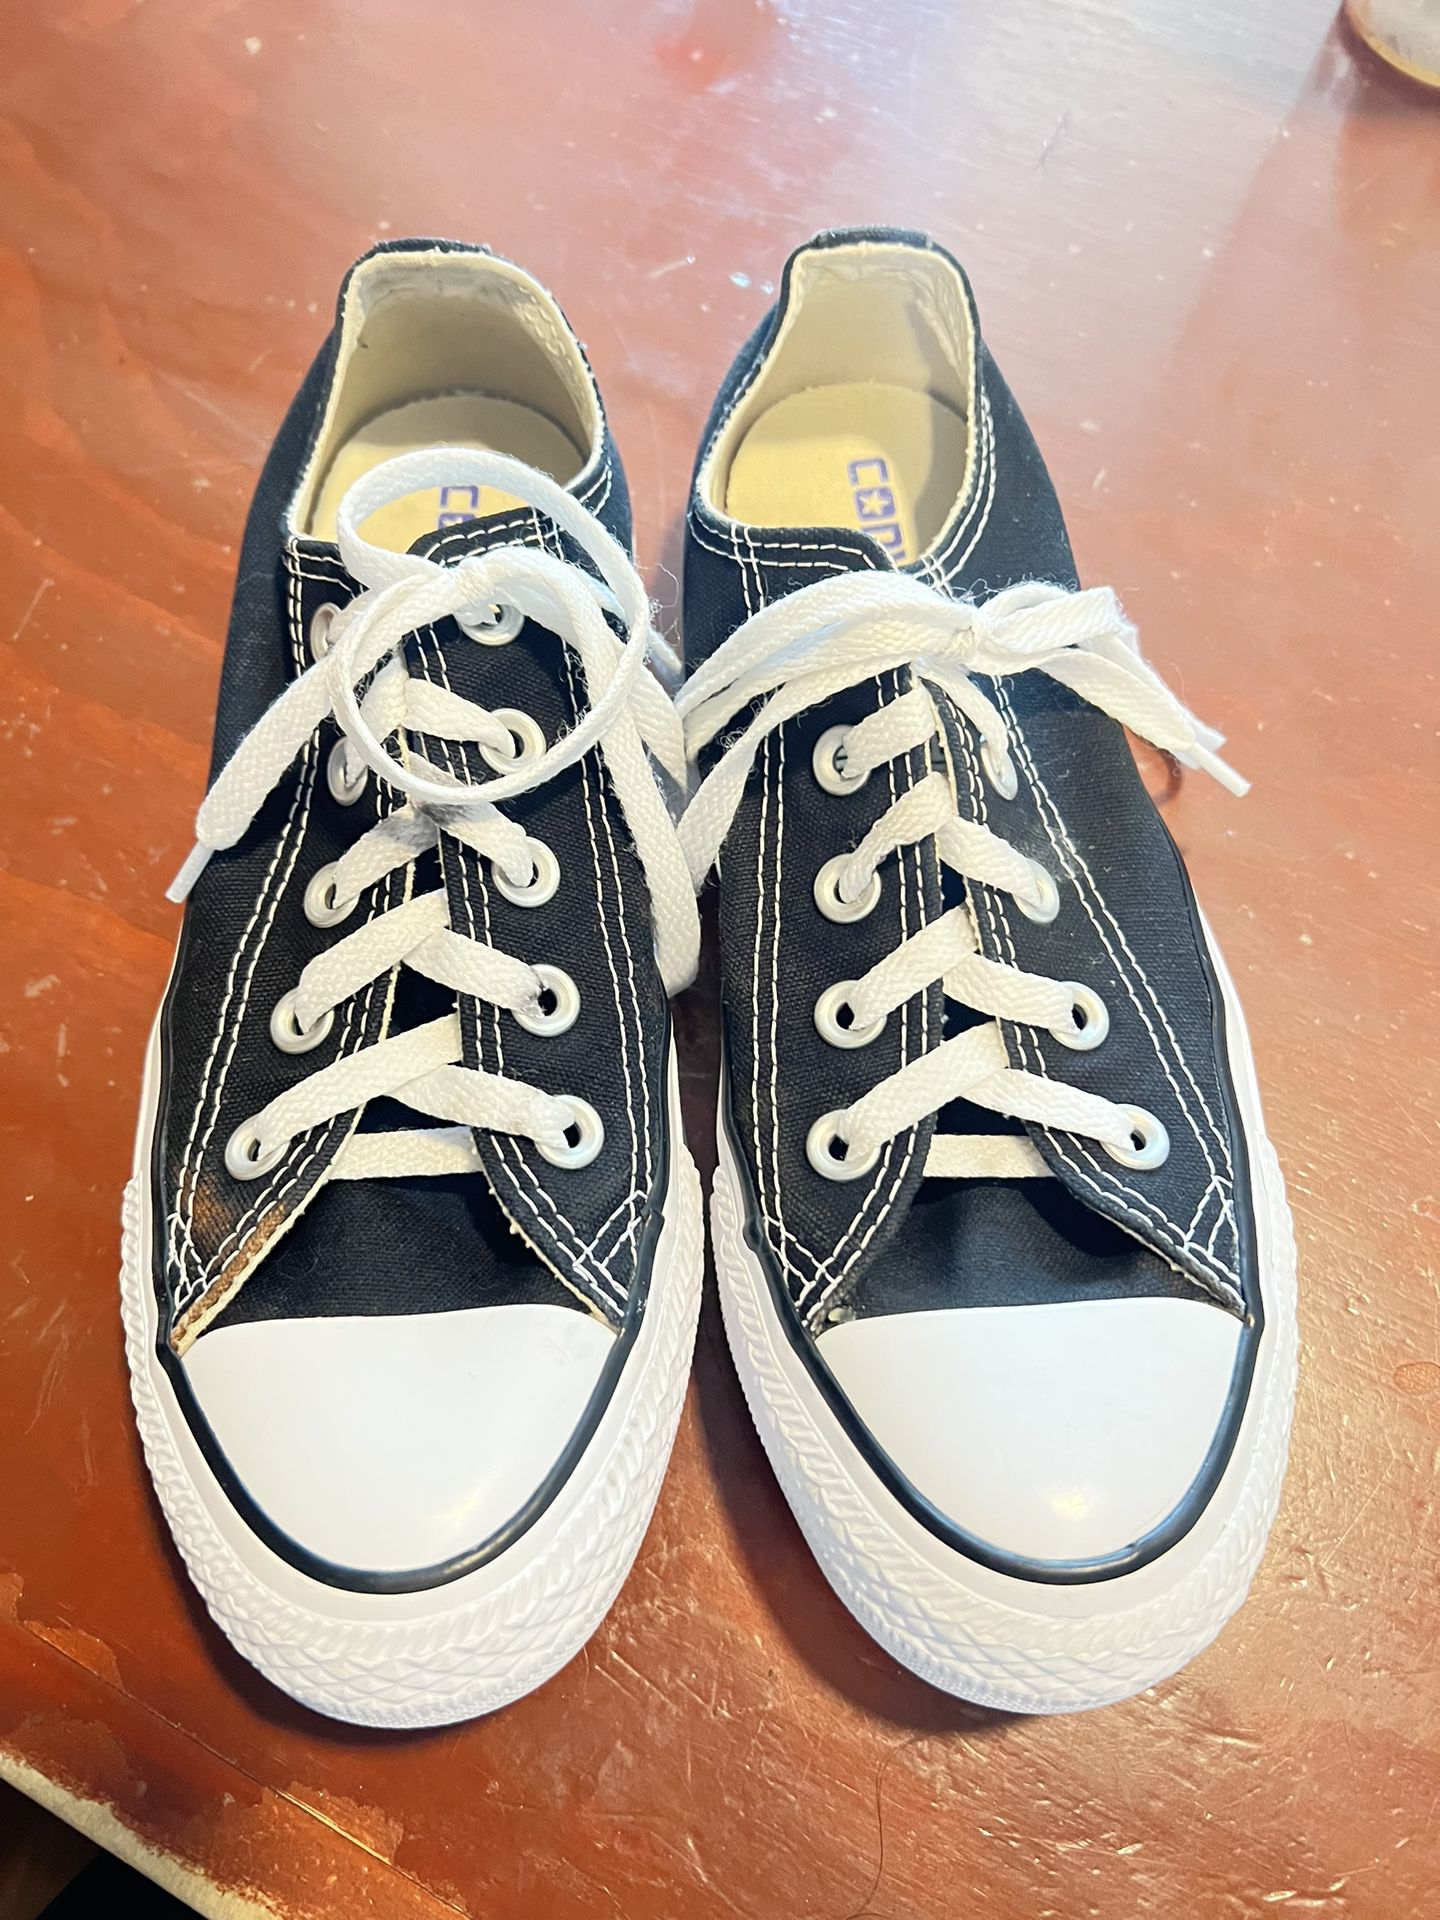 Converse All Star sneakers black Women 6 Men’s 4 It has a stain! Details in the photos